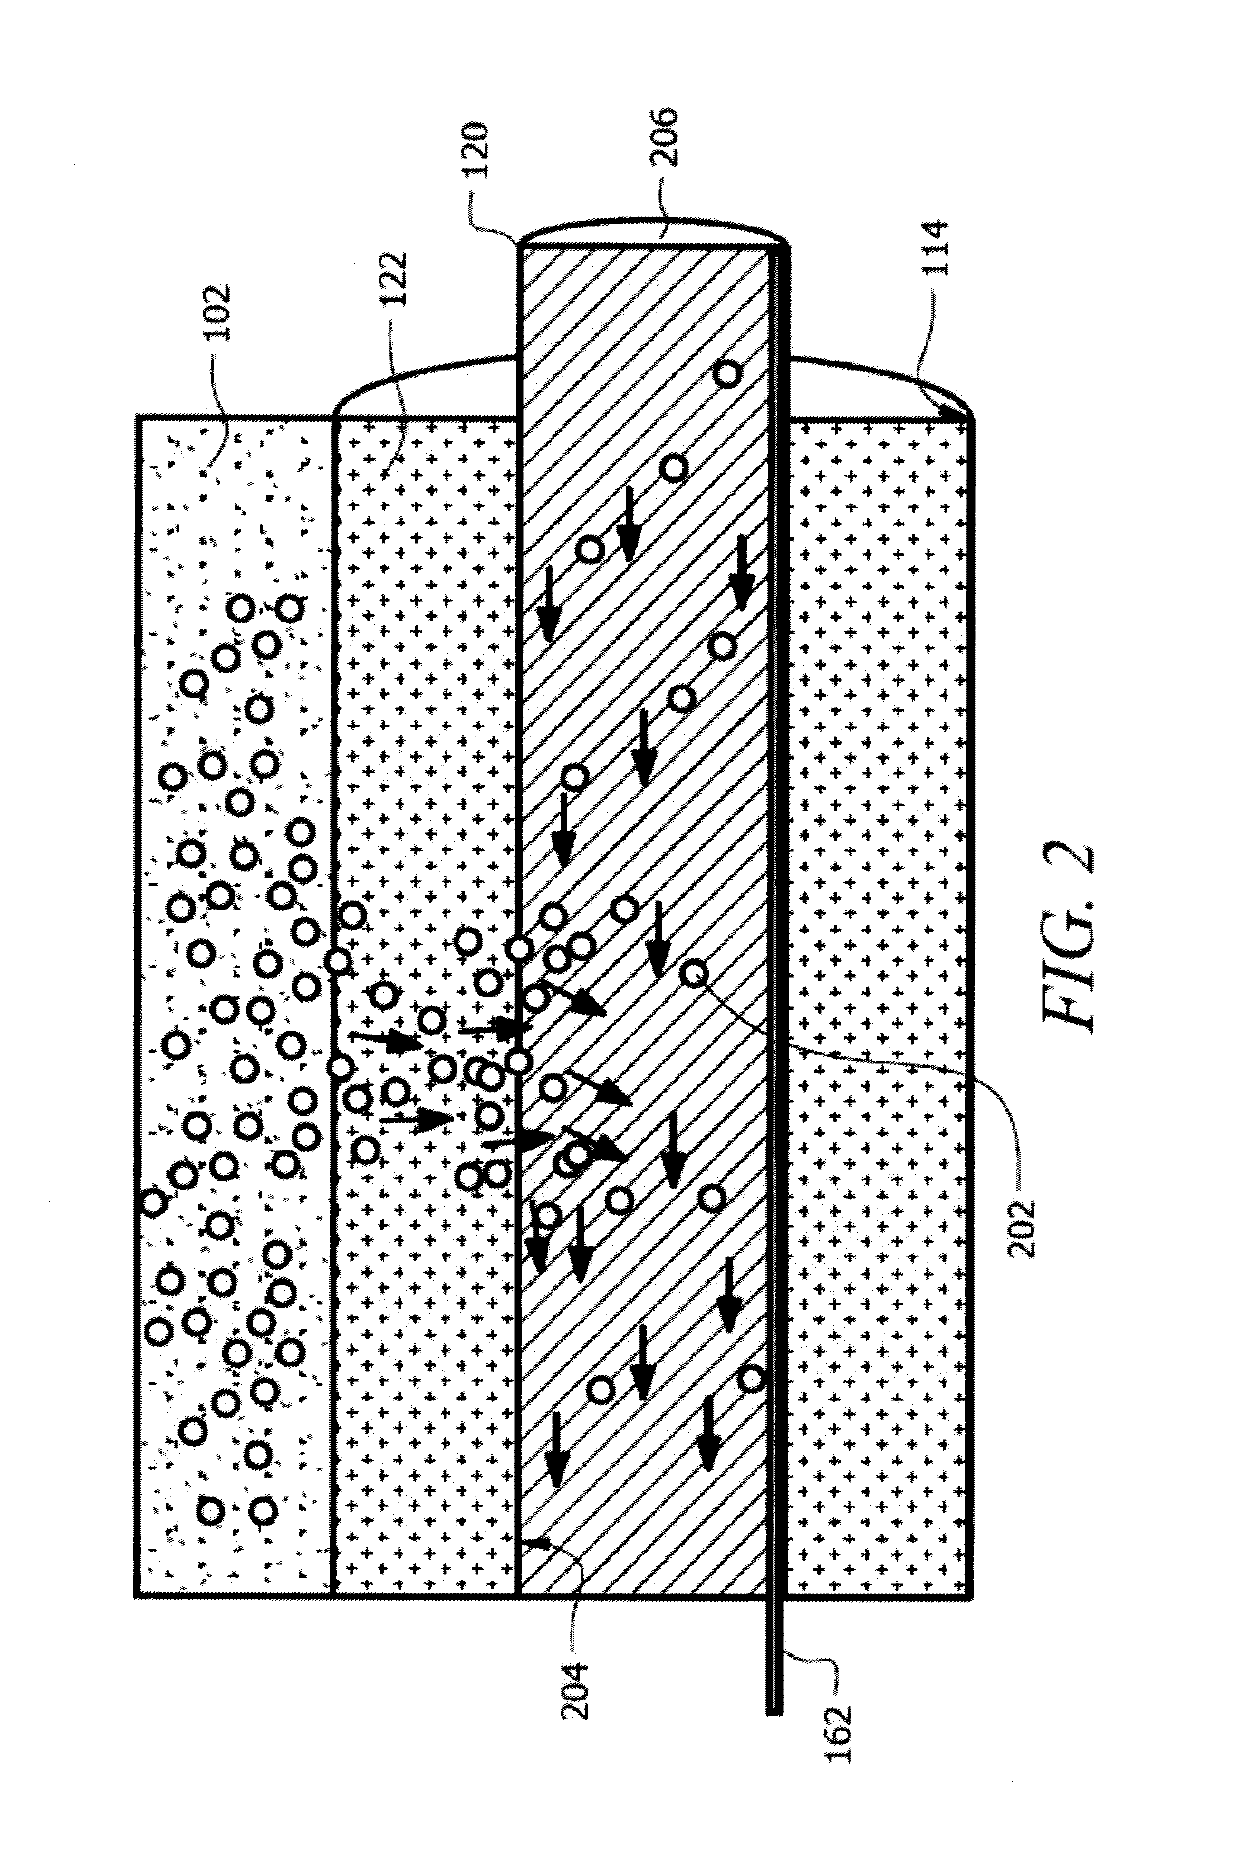 Detecting Downhole Events Using Acoustic Frequency Domain Features